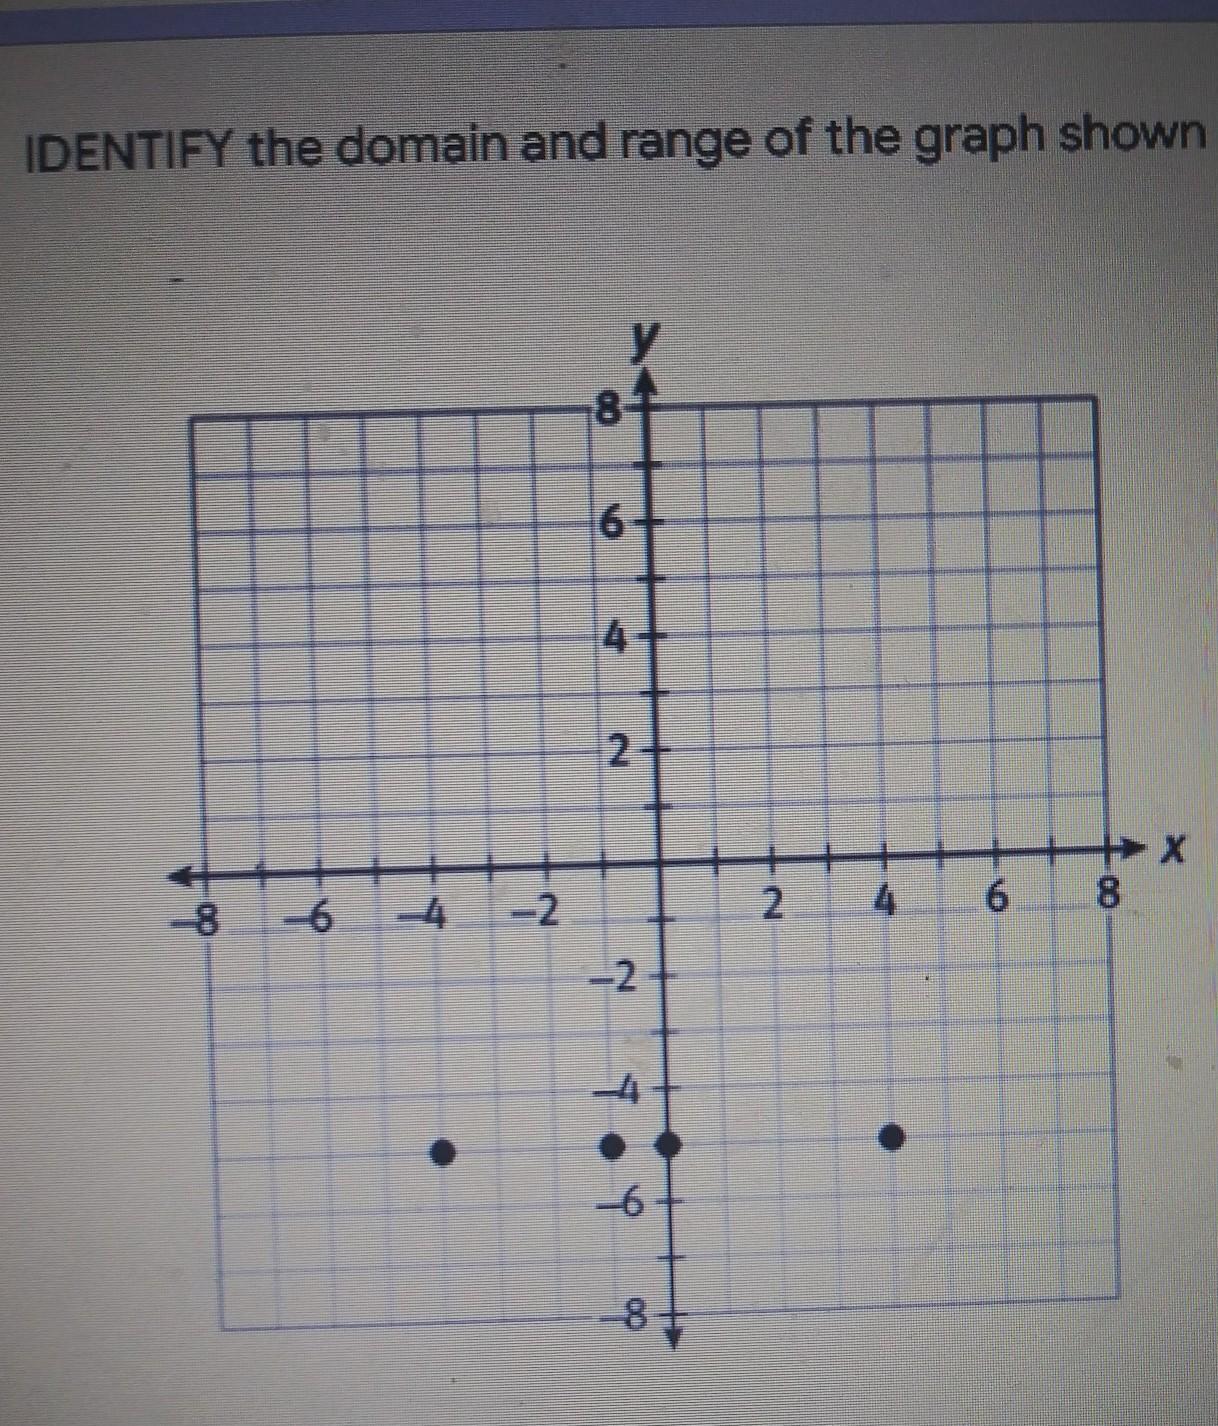 I Don't Know How To Identify The Domain And Range Of The Graph